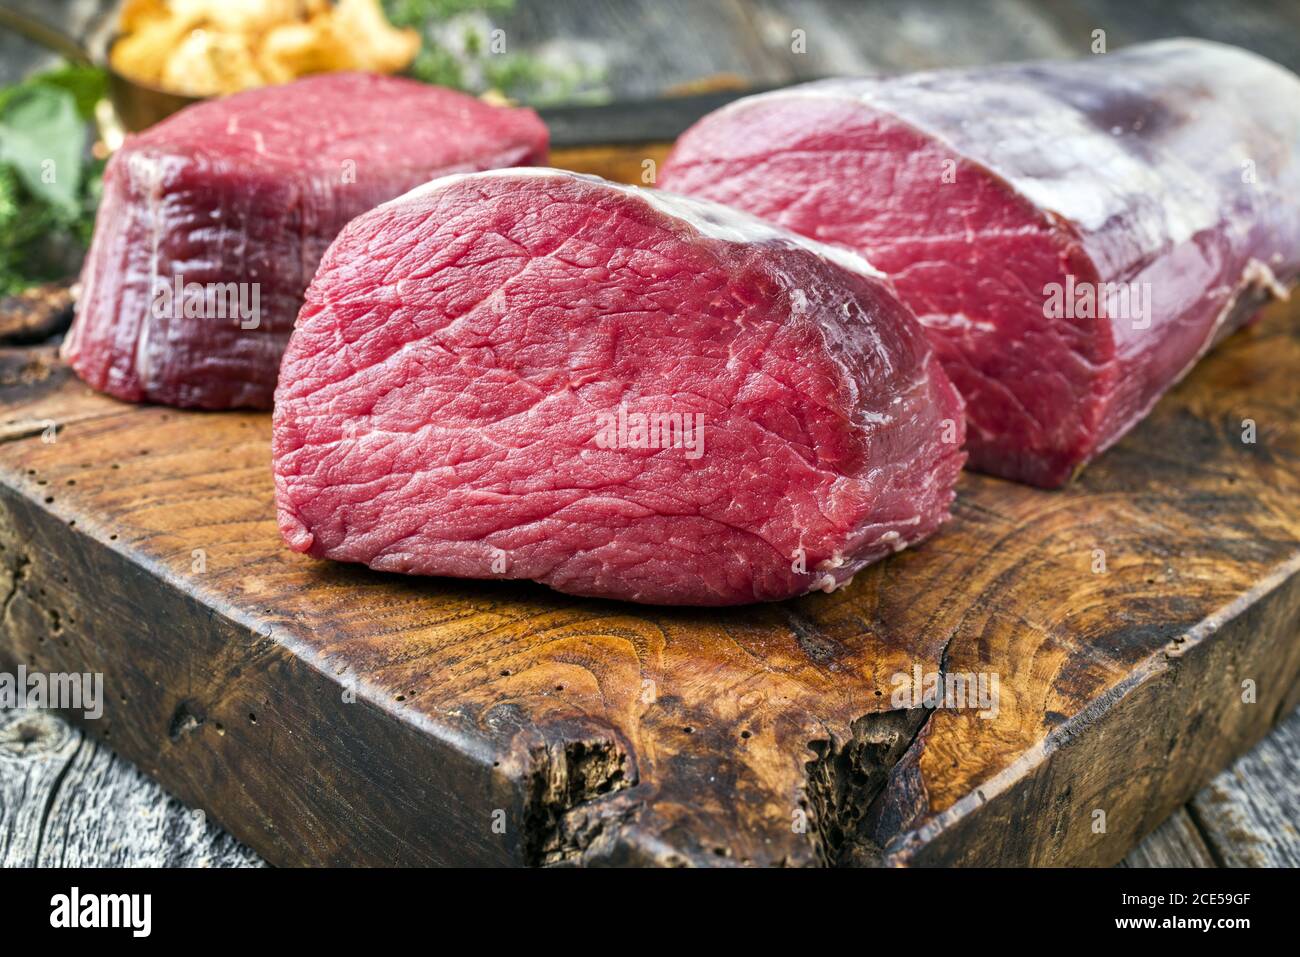 Dry aged beef fillet steak natural as closeup with chanterelles on a wooden cutting board Stock Photo